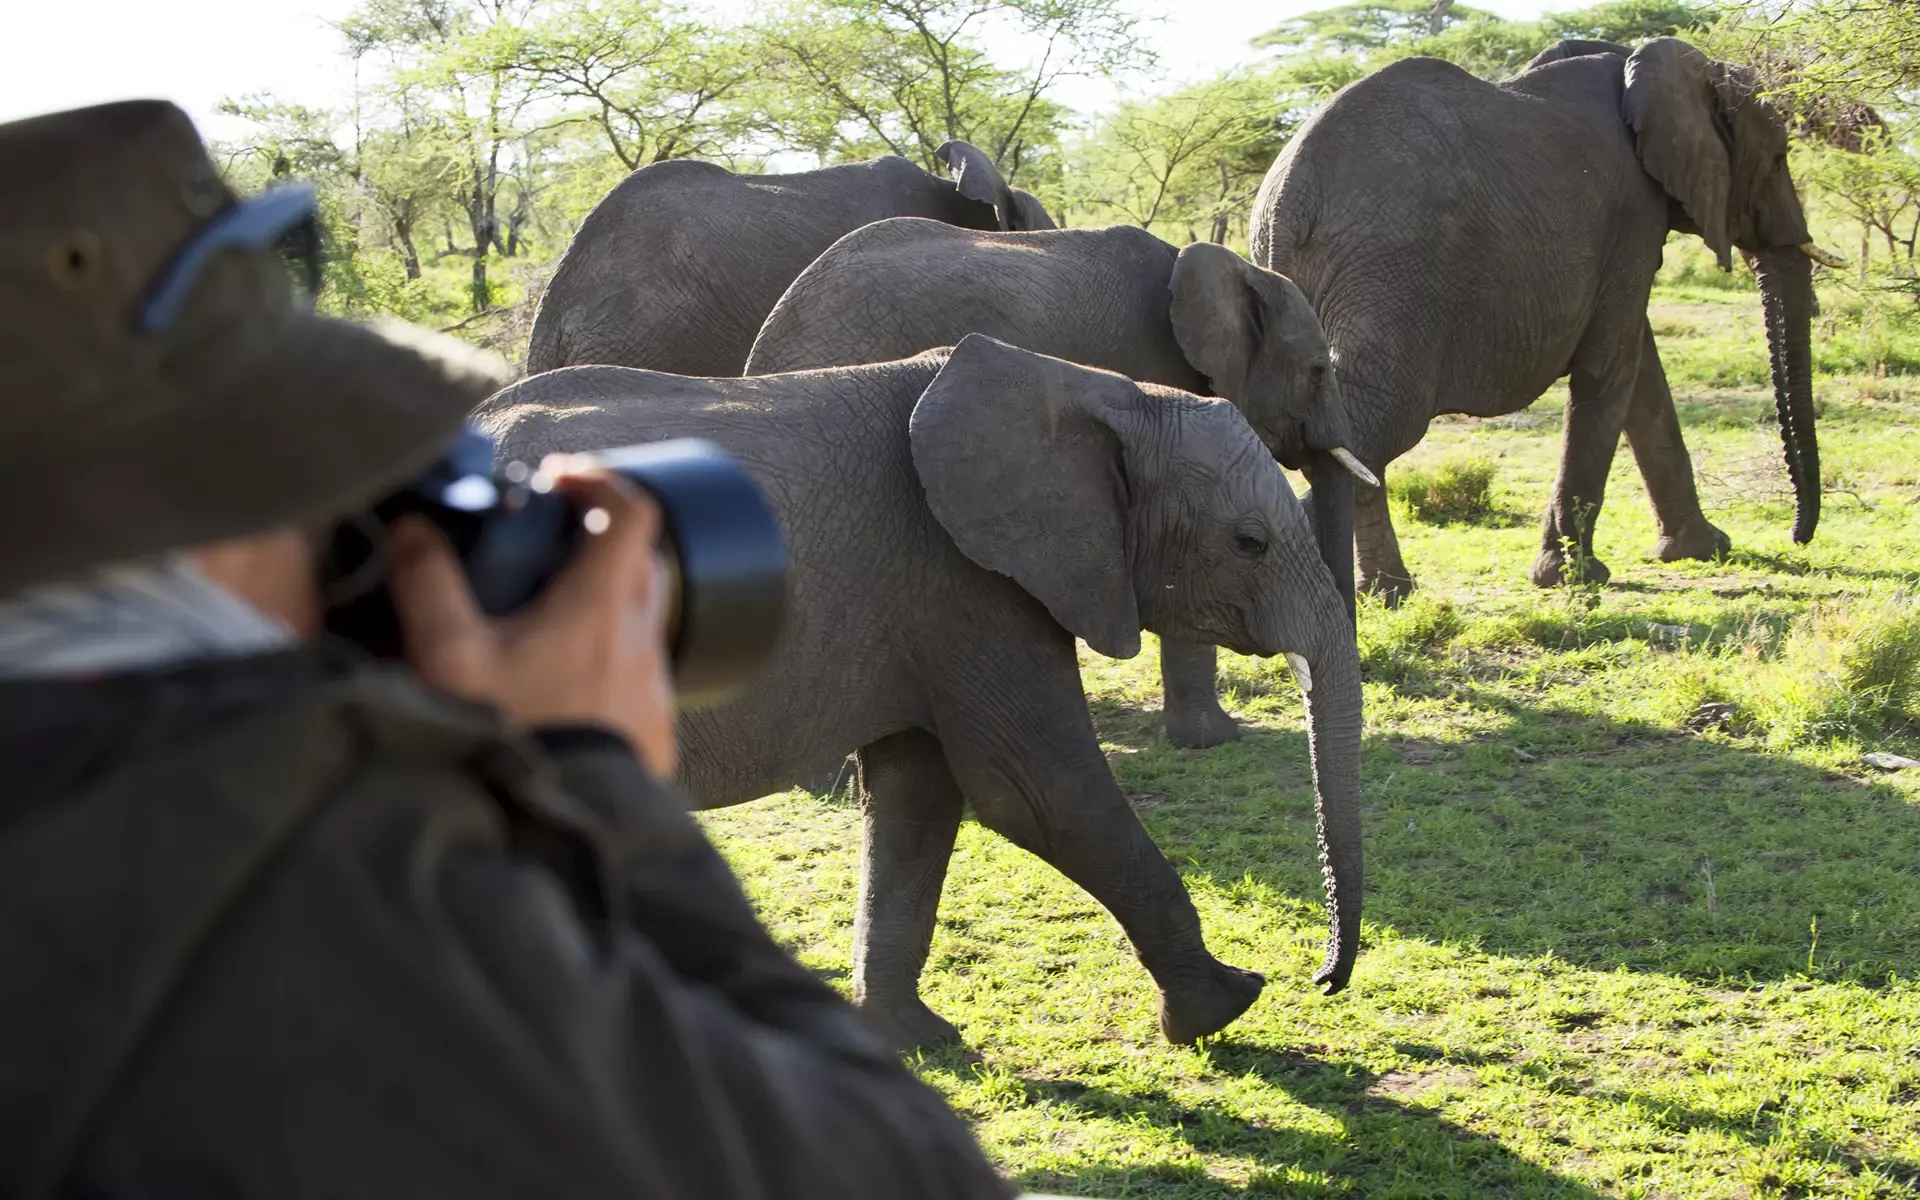 Herds of elephants grazing the Serengeti during an exciting photo safari.